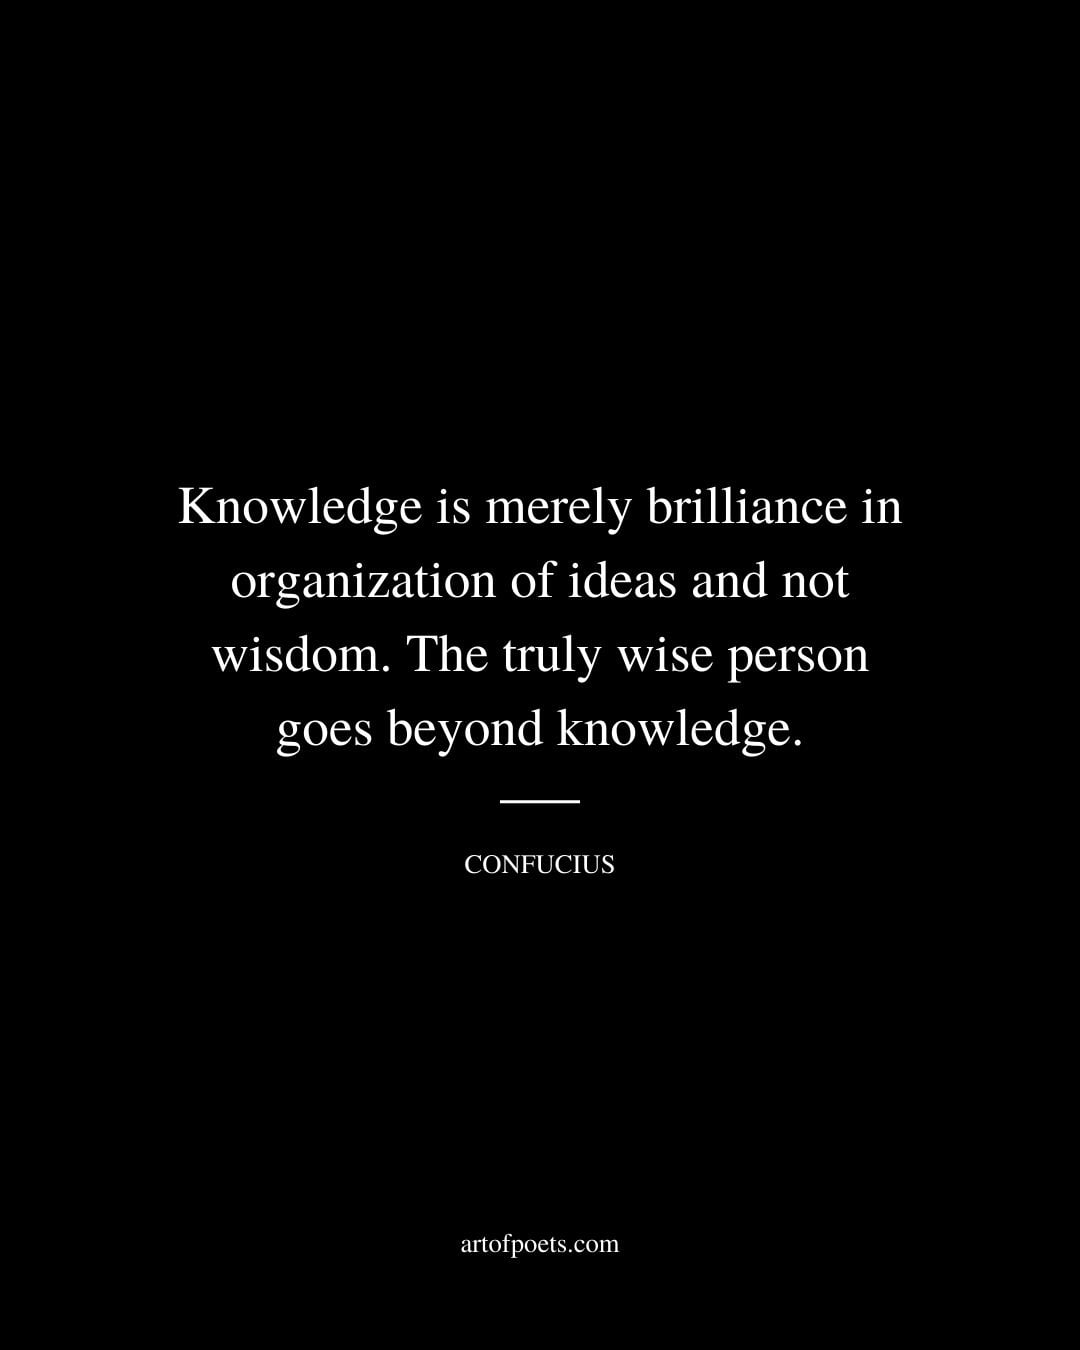 Knowledge is merely brilliance in organization of ideas and not wisdom. The truly wise person goes beyond knowledge